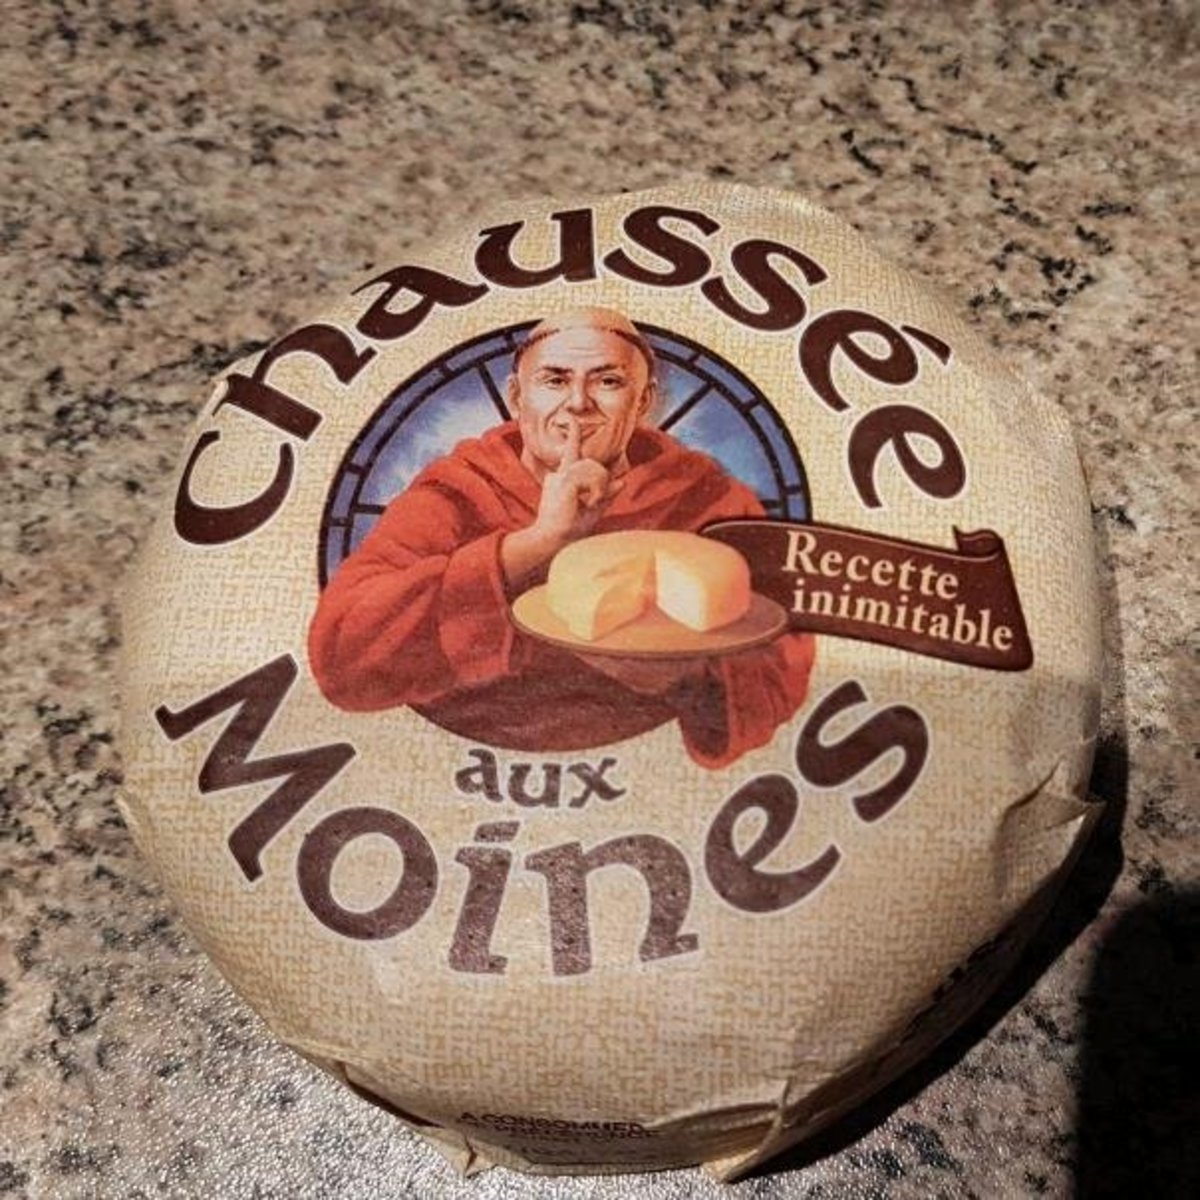 chaussee aux moines 340g